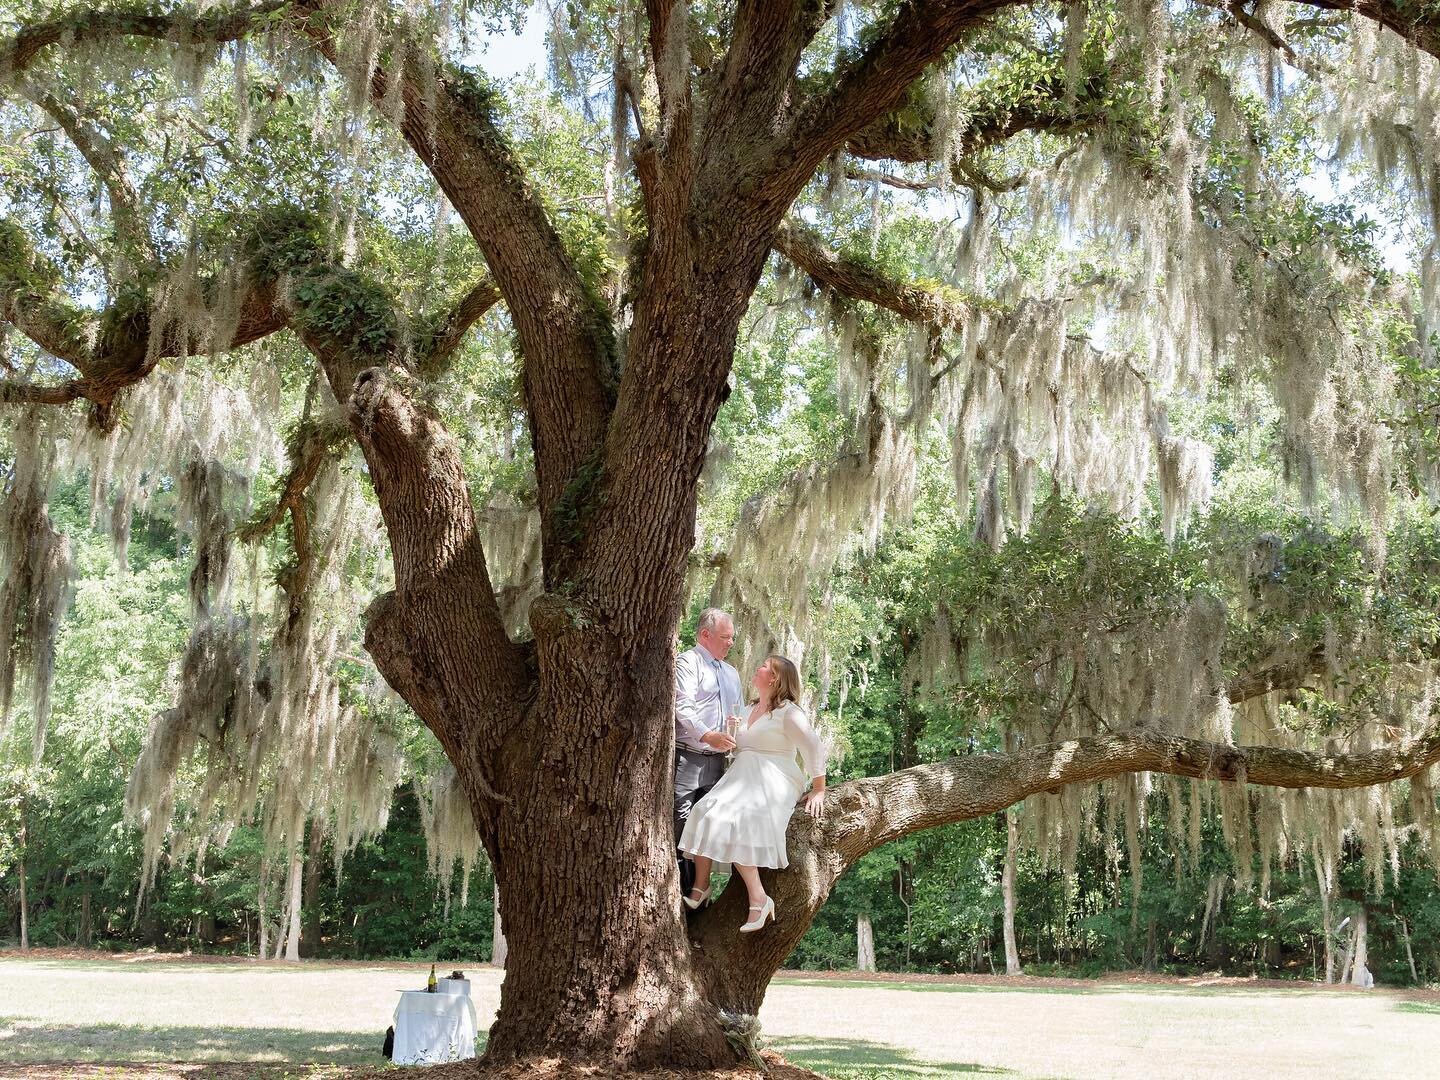 You wouldn&rsquo;t be wrong thinking I want all my couples to climb trees, but Erin and Jarred came up with this idea all on their own! After 20 years married they&rsquo;re still bringing all the adventure! 
.
.
Vow Renewal by: @reynoldstreasures 
Ph